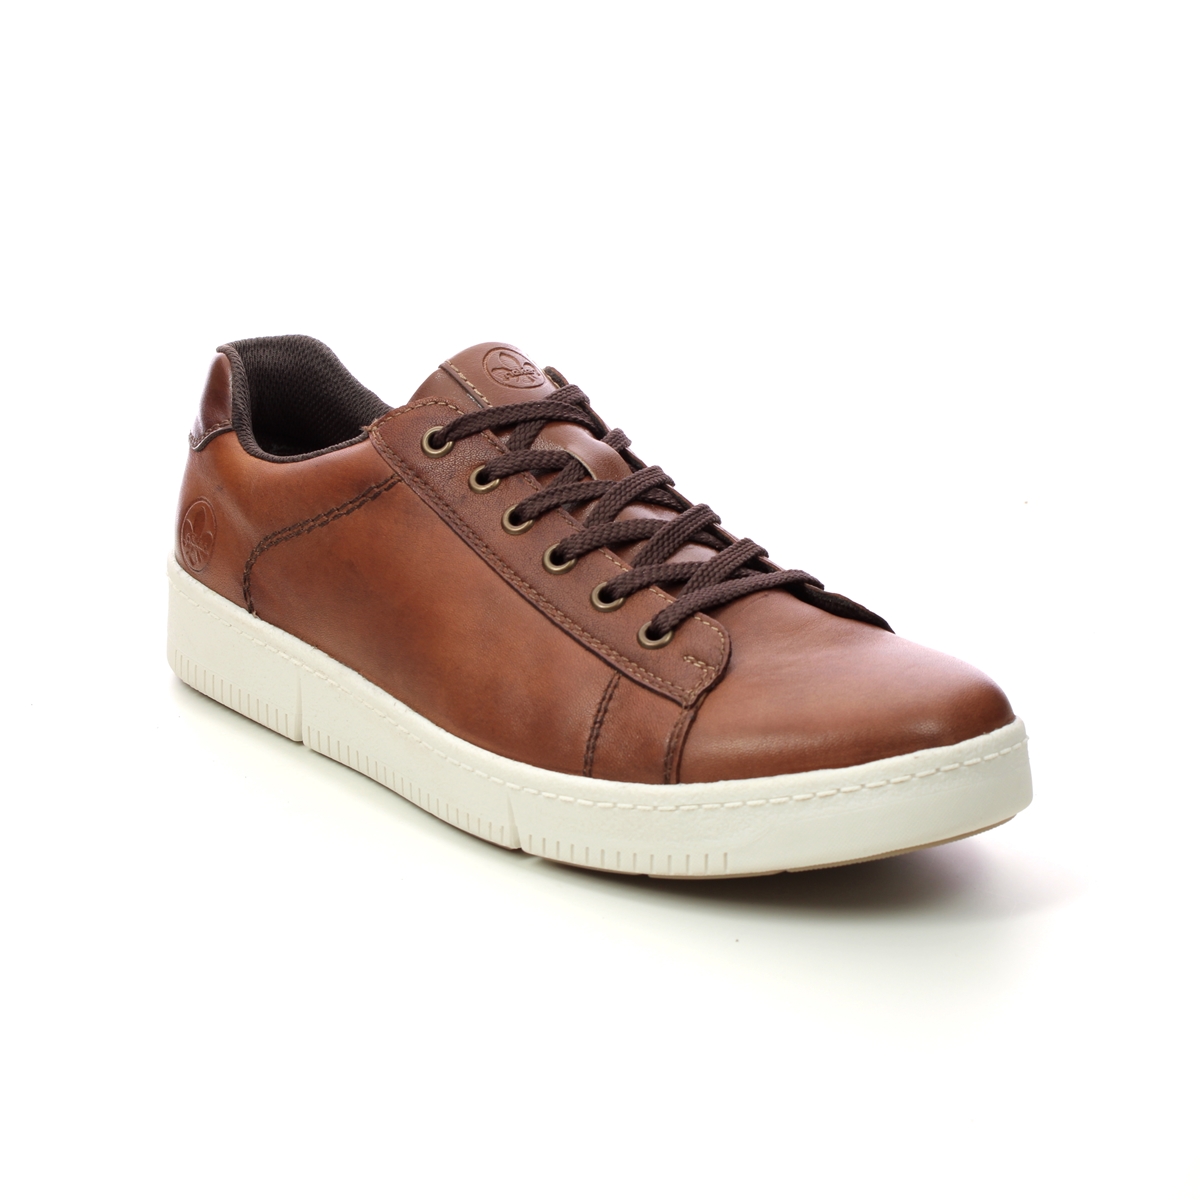 Rieker Seven Soft Tan Leather Mens Trainers B7120-24 In Size 42 In Plain Tan Leather